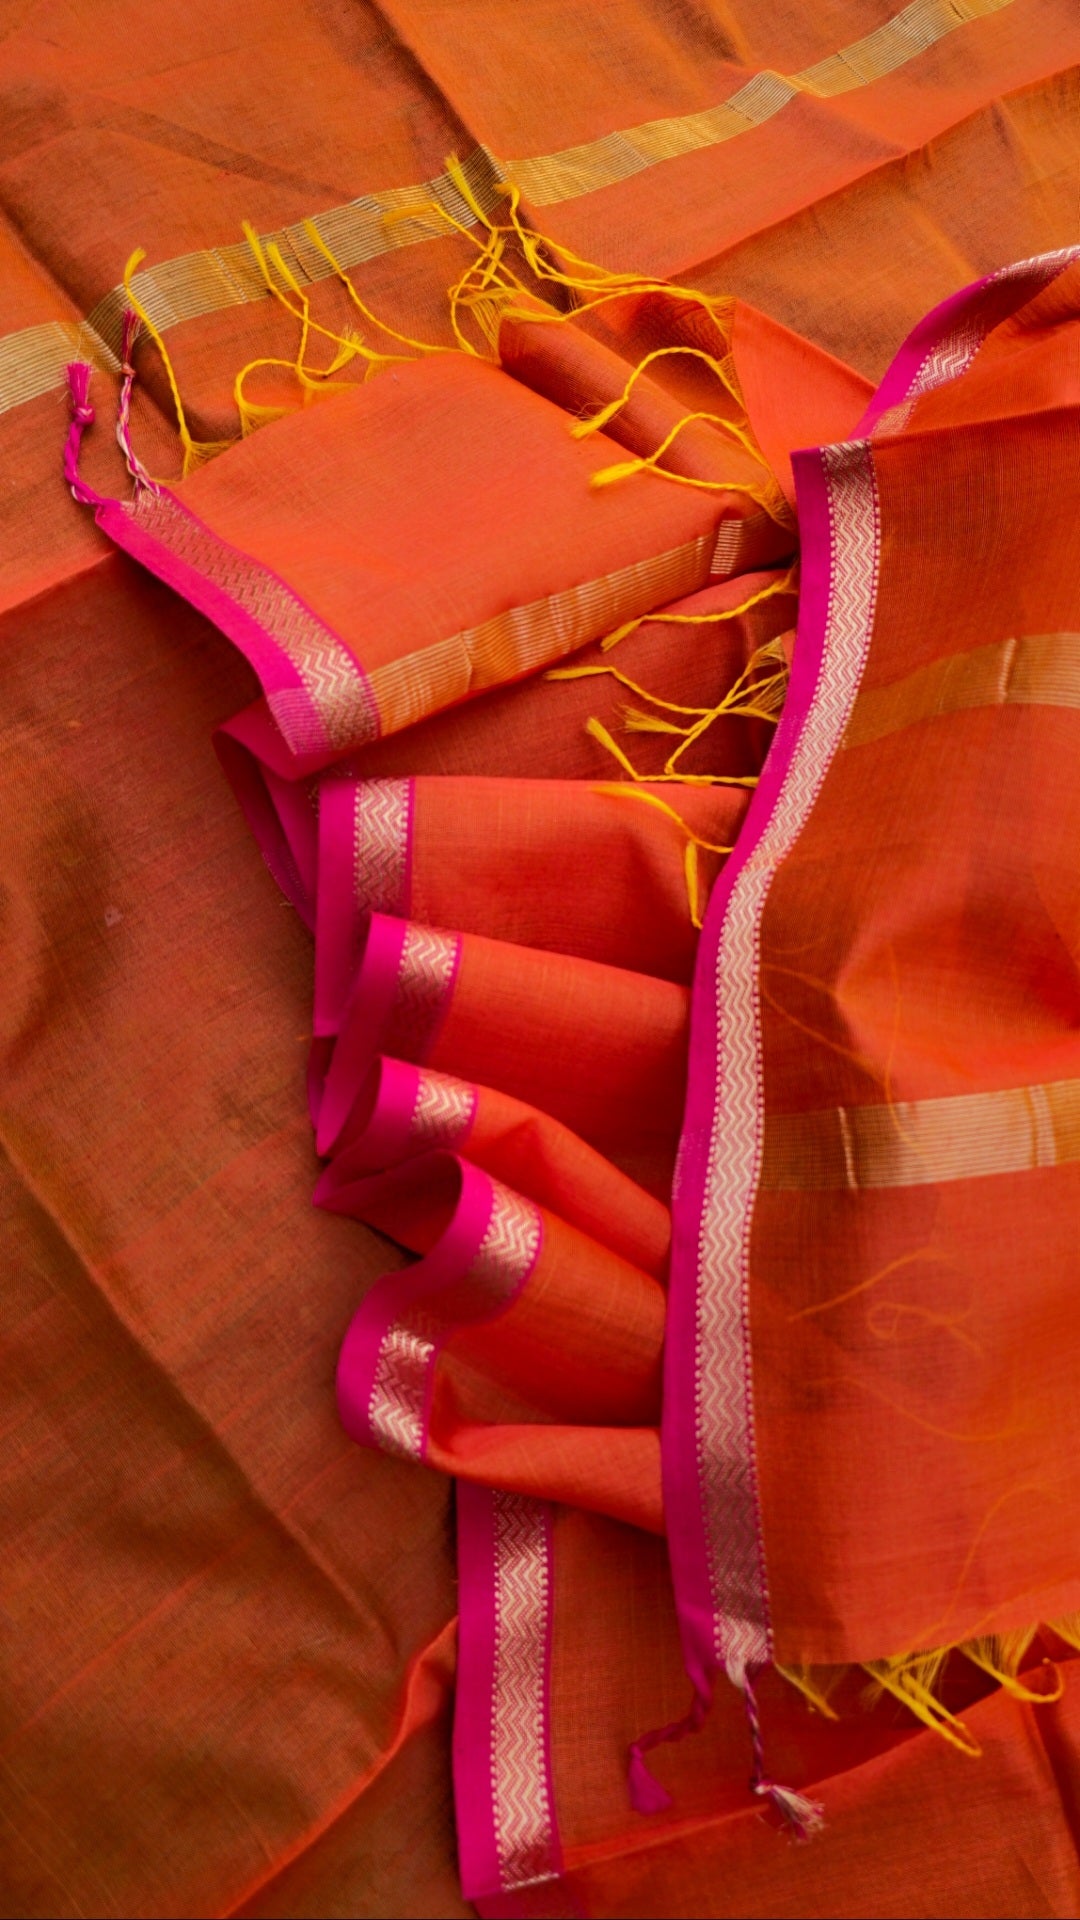 Dupatta in Burnt Orange shade with Pink/Gold Borders.